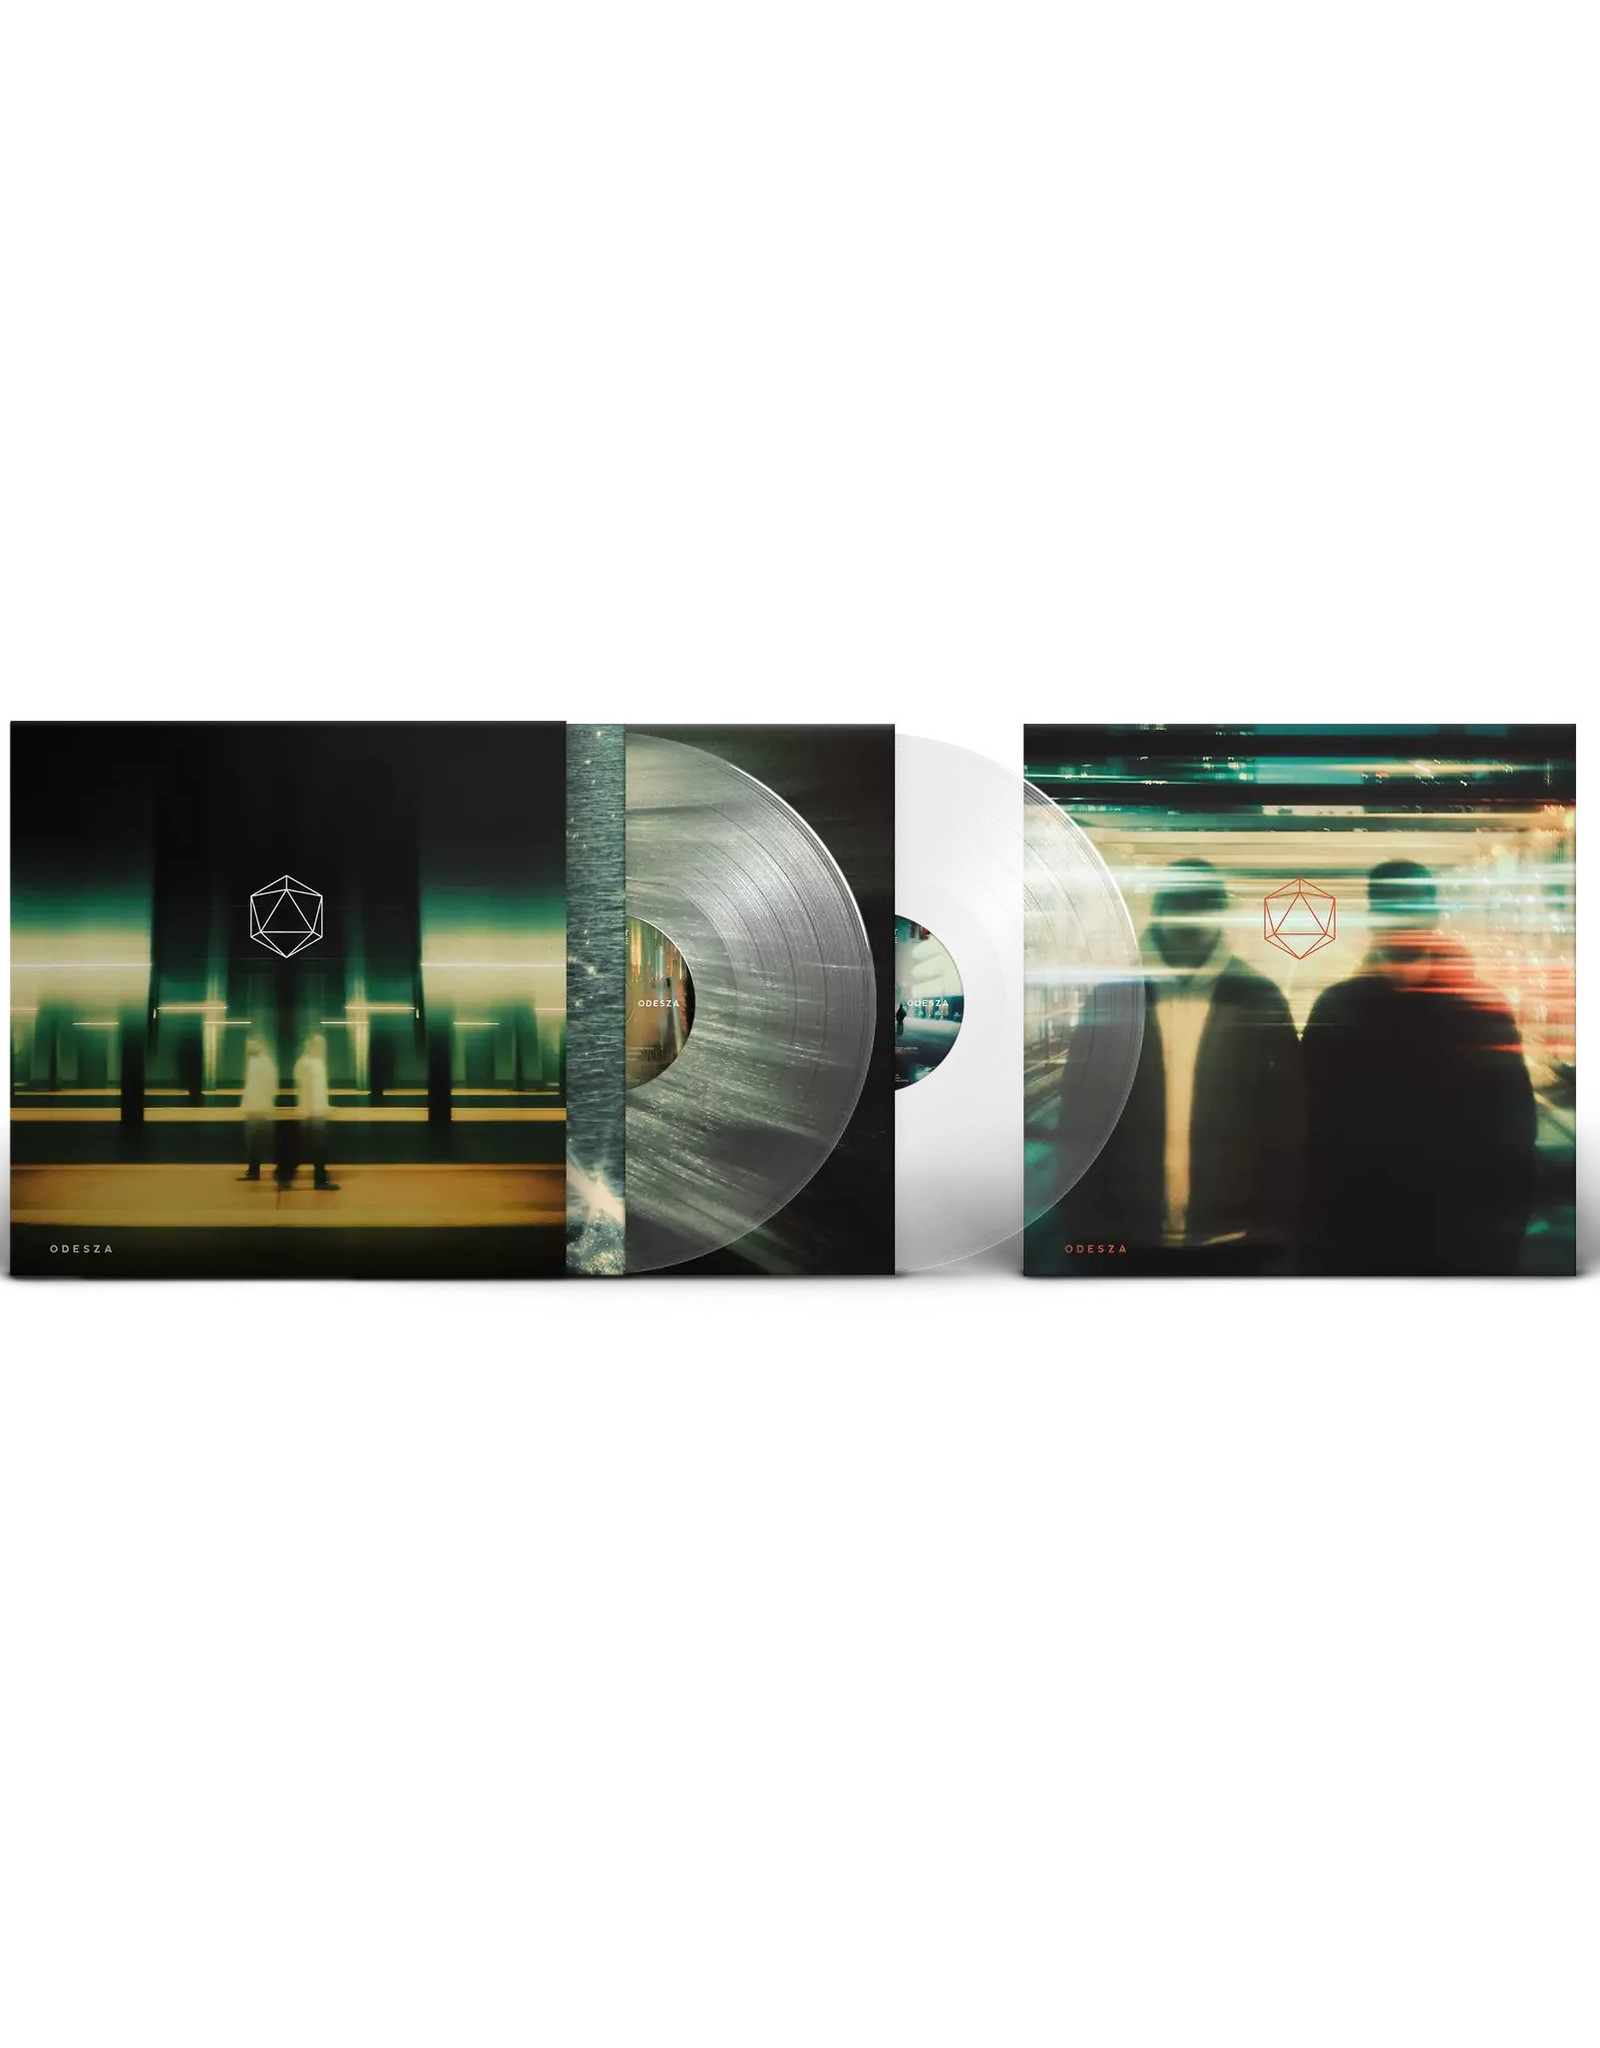 ODESZA - The Last Goodbye (Exclusive Clear Vinyl)